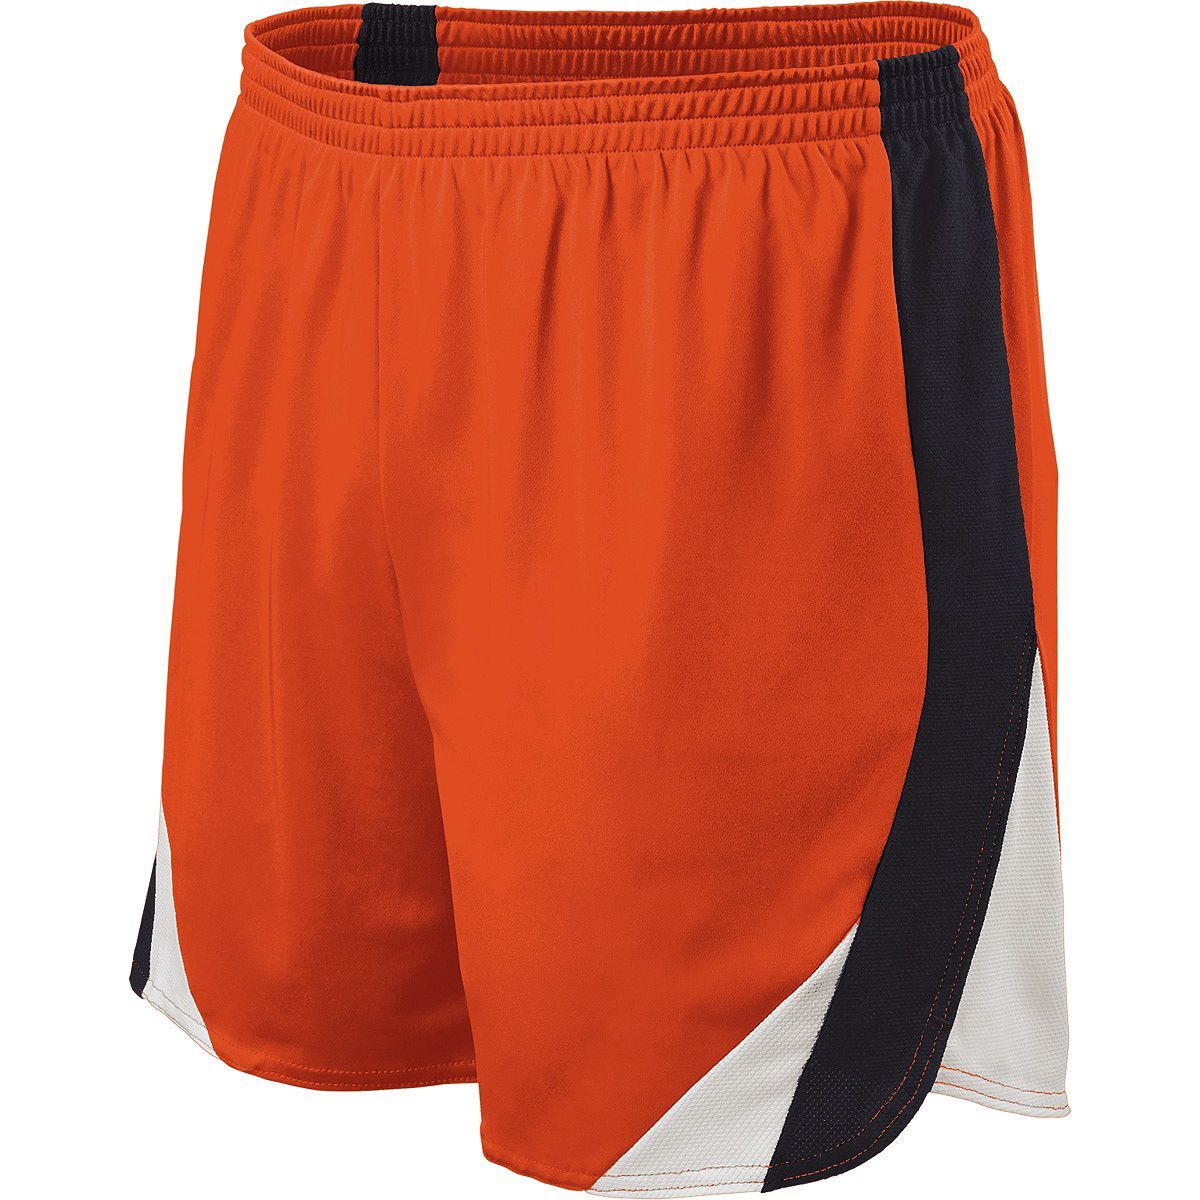 Holloway Approach Shorts in Orange/Black/White  -Part of the Adult, Adult-Shorts, Track-Field, Holloway product lines at KanaleyCreations.com